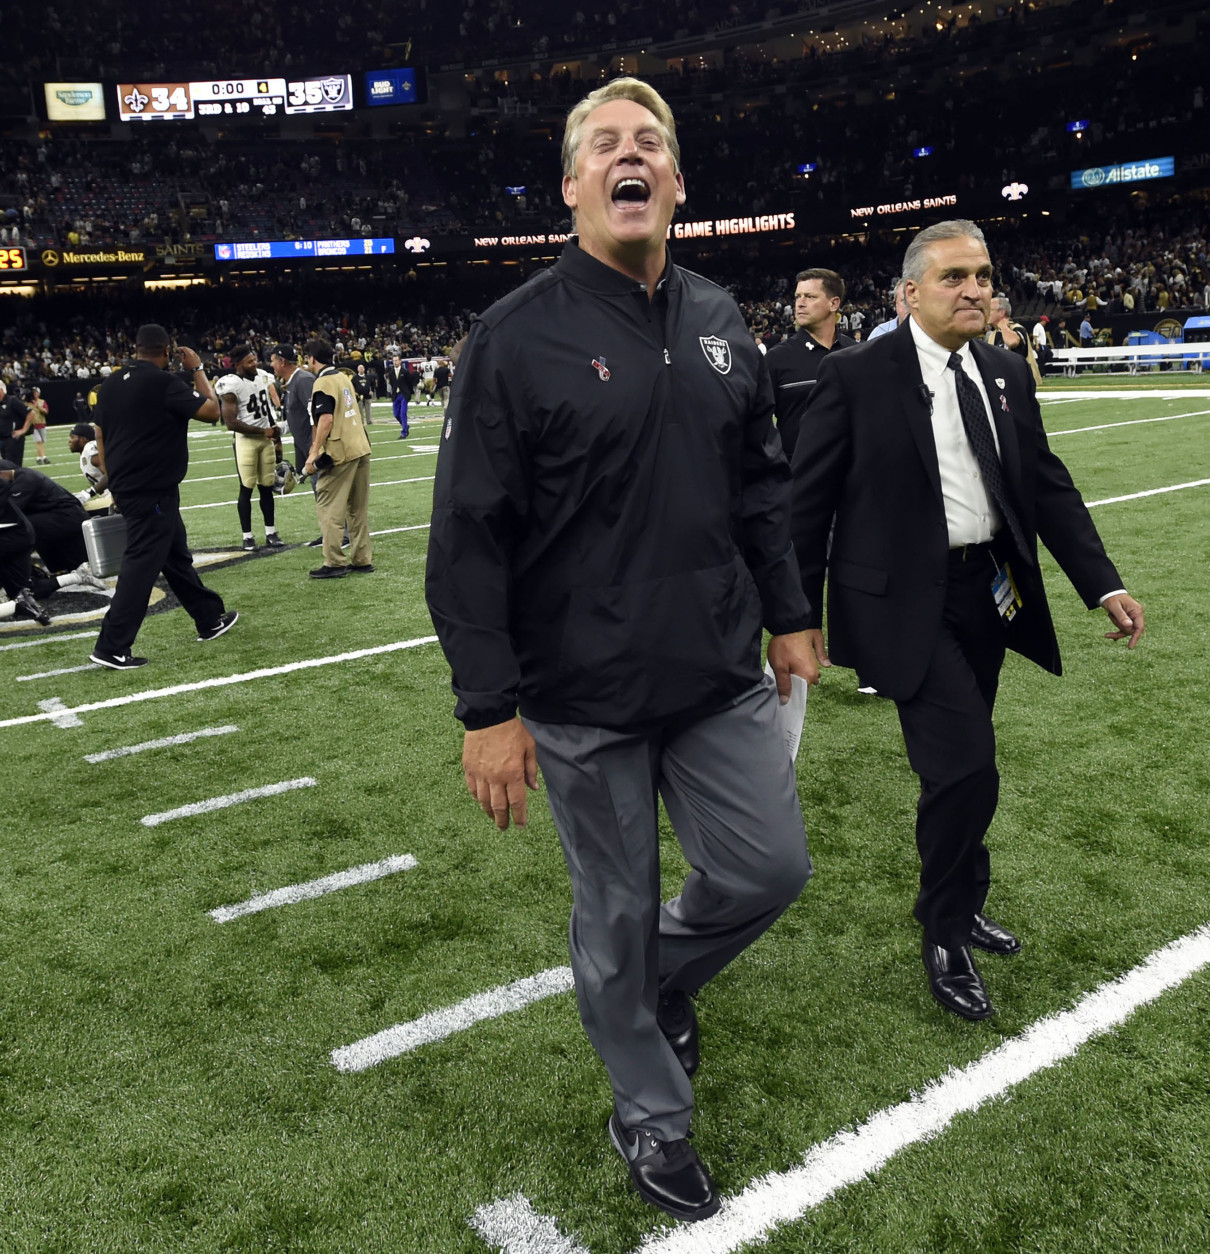 Oakland Raiders head coach Jack Del Rio lets out a yell as he walks off the field after  an NFL football game against the Oakland Raiders in New Orleans, Sunday, Sept. 11, 2016. The Raiders won 35-34. (AP Photo/Bill Feig)